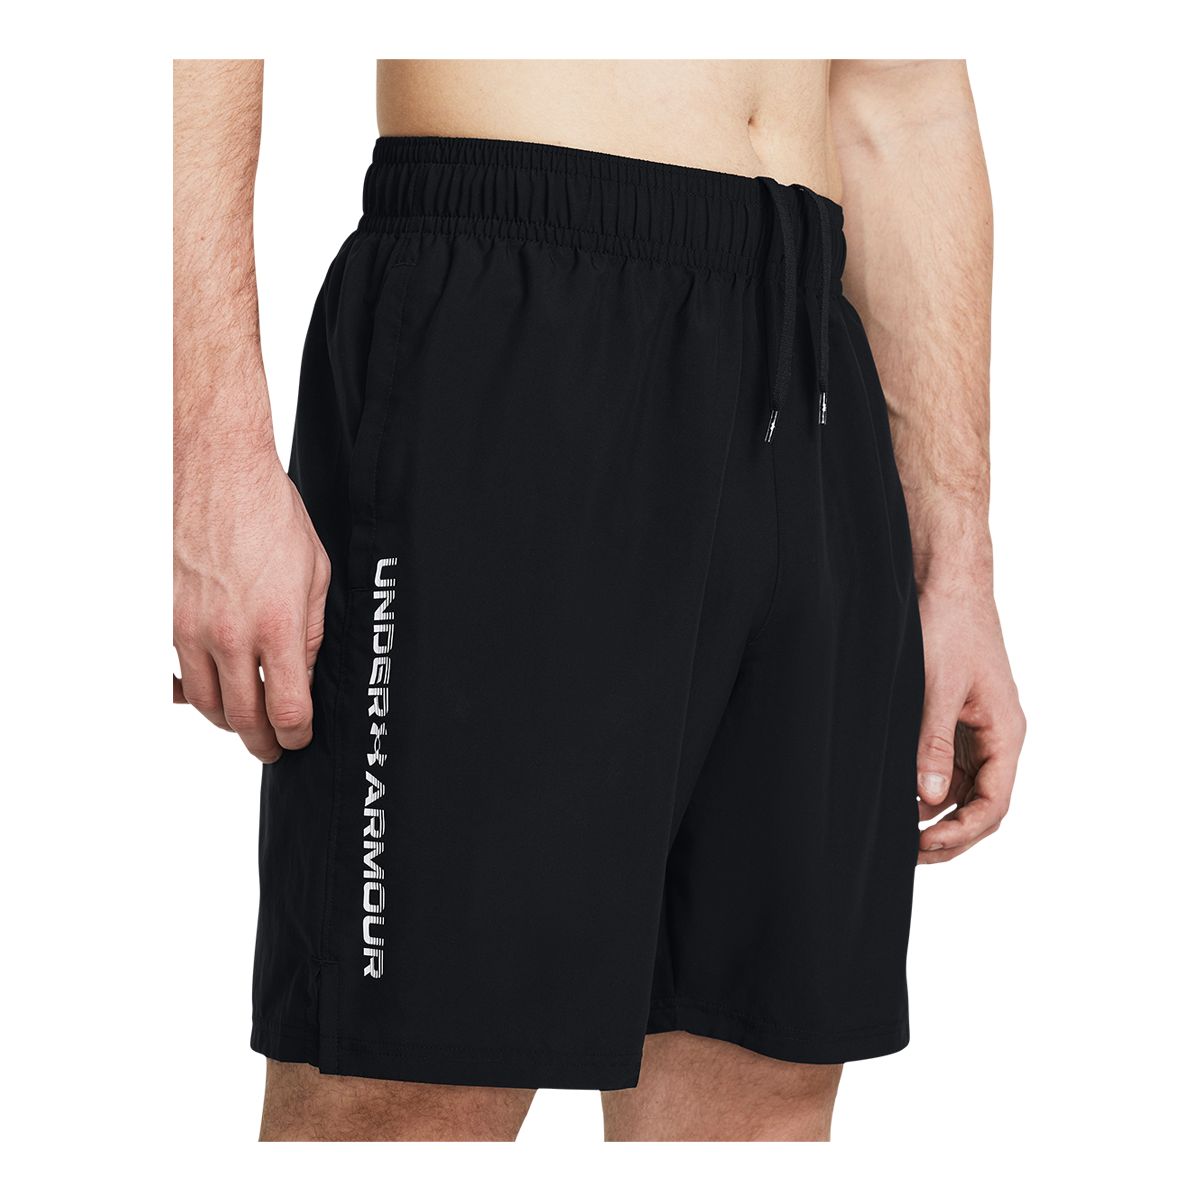 Image of Under Armour Men's Woven Wordmark Shorts